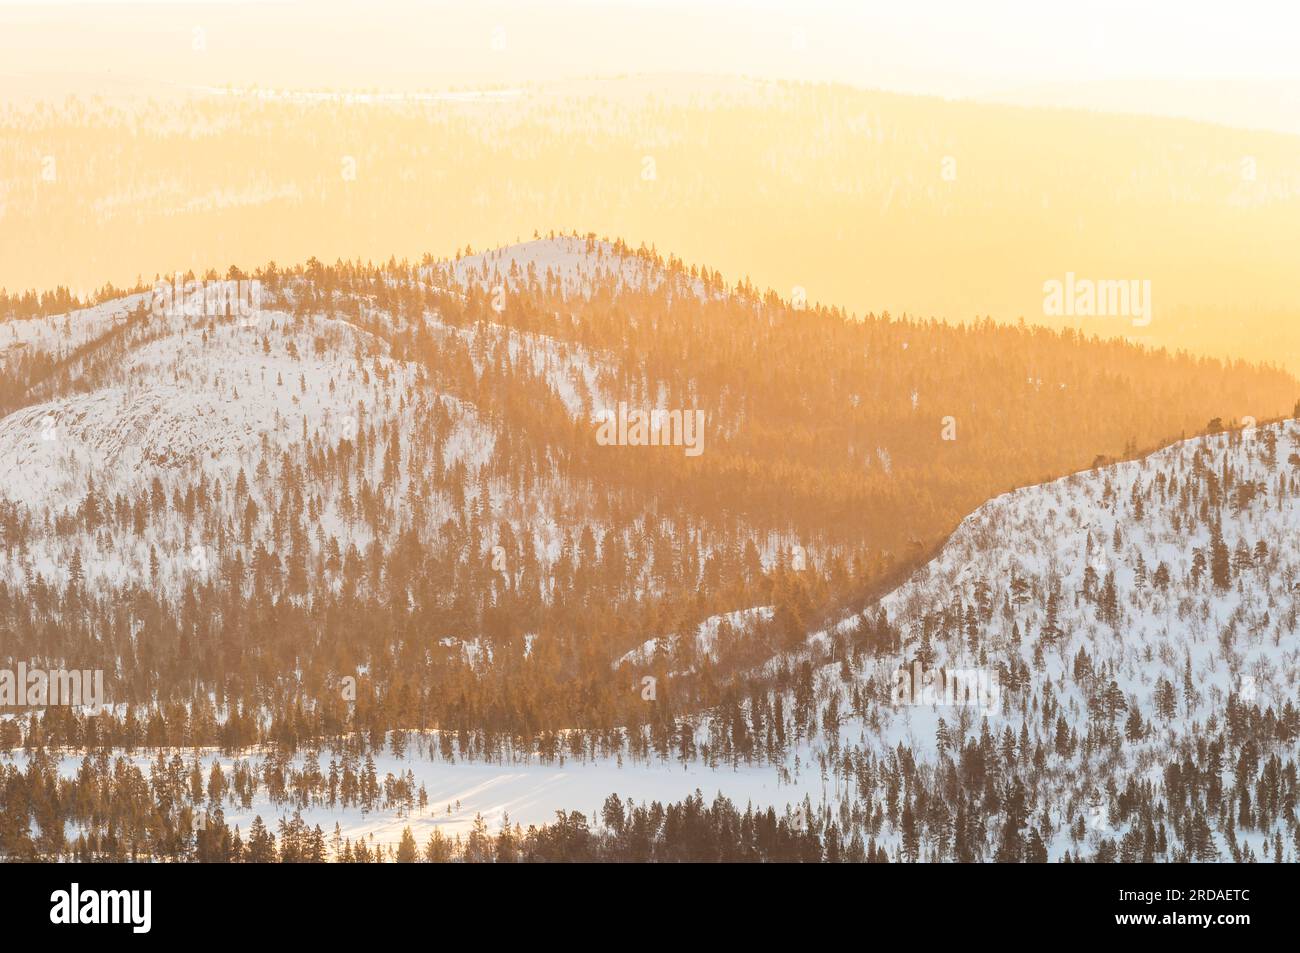 Tranquil winter landscape in Norway: snow-covered trees, mountains, and serene sunset. Stock Photo